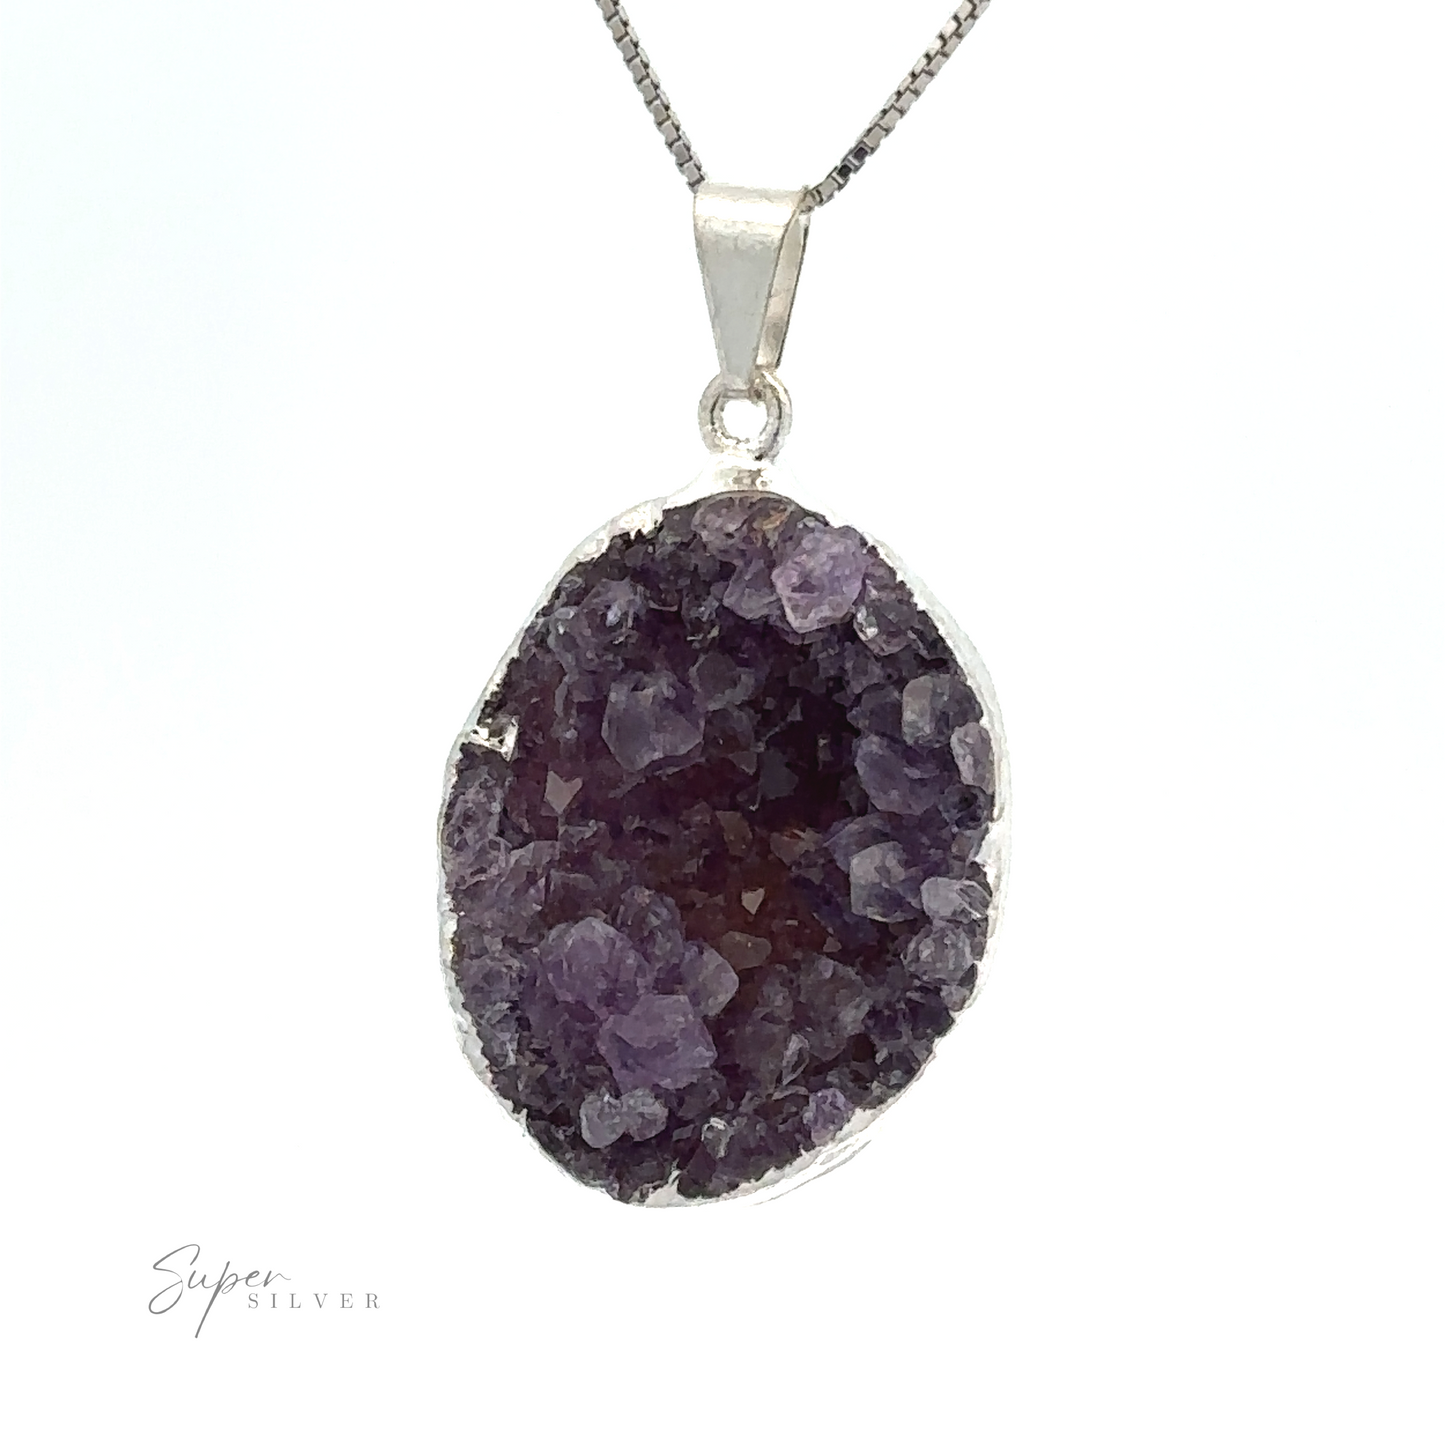 
                  
                    Close-up of an Amethyst Geode Pendant featuring a purple crystal on a silver chain against a white background. Encased in silver-plated casing, the Amethyst Geode Pendant has rough, faceted edges, and the inscription "Super Silver" is visible at the bottom left.
                  
                